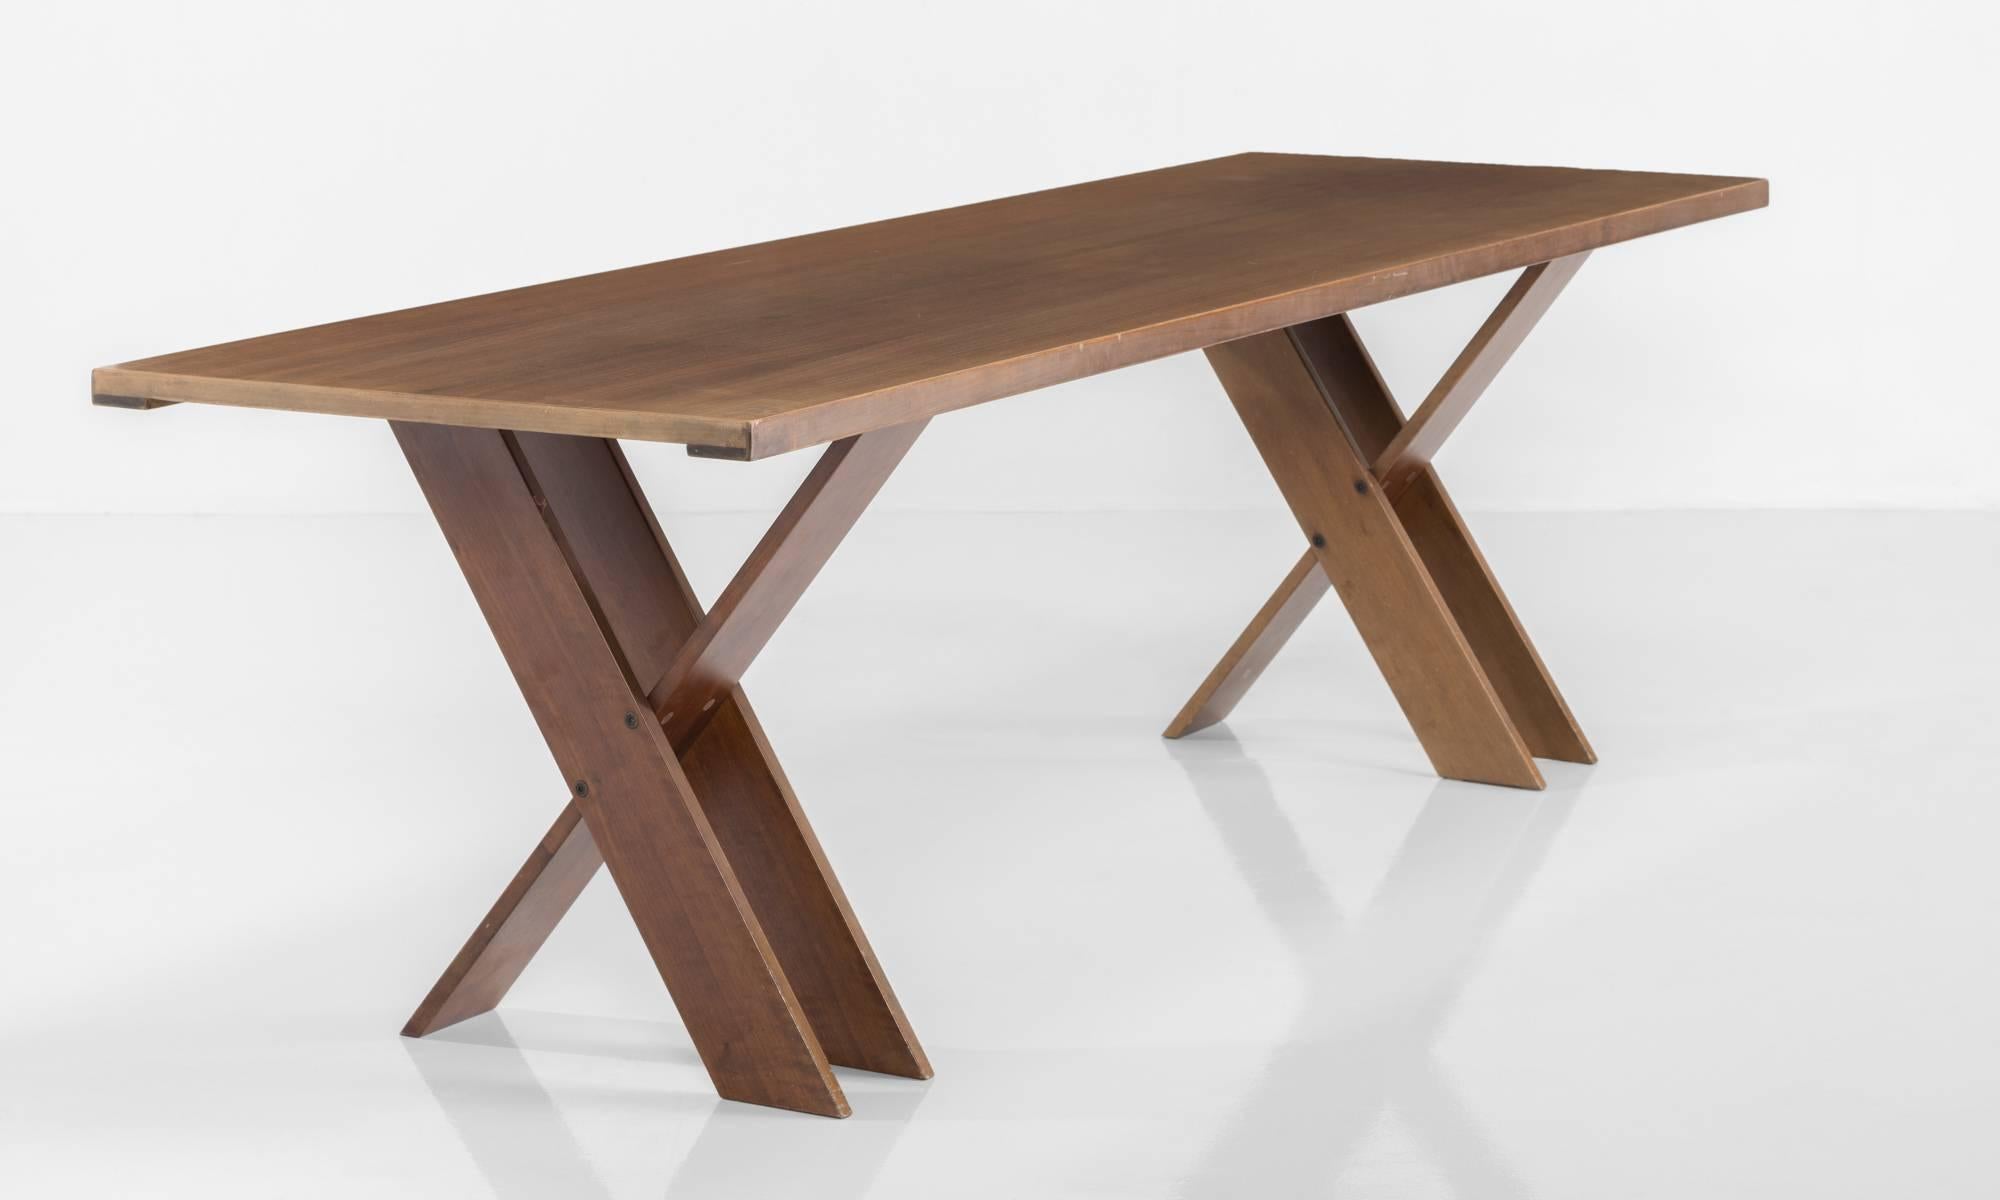 Model TL 58 dining table, designed by Marco Zanuso.

Walnut top on unique X-base, manufactured in Italy, circa 1974.